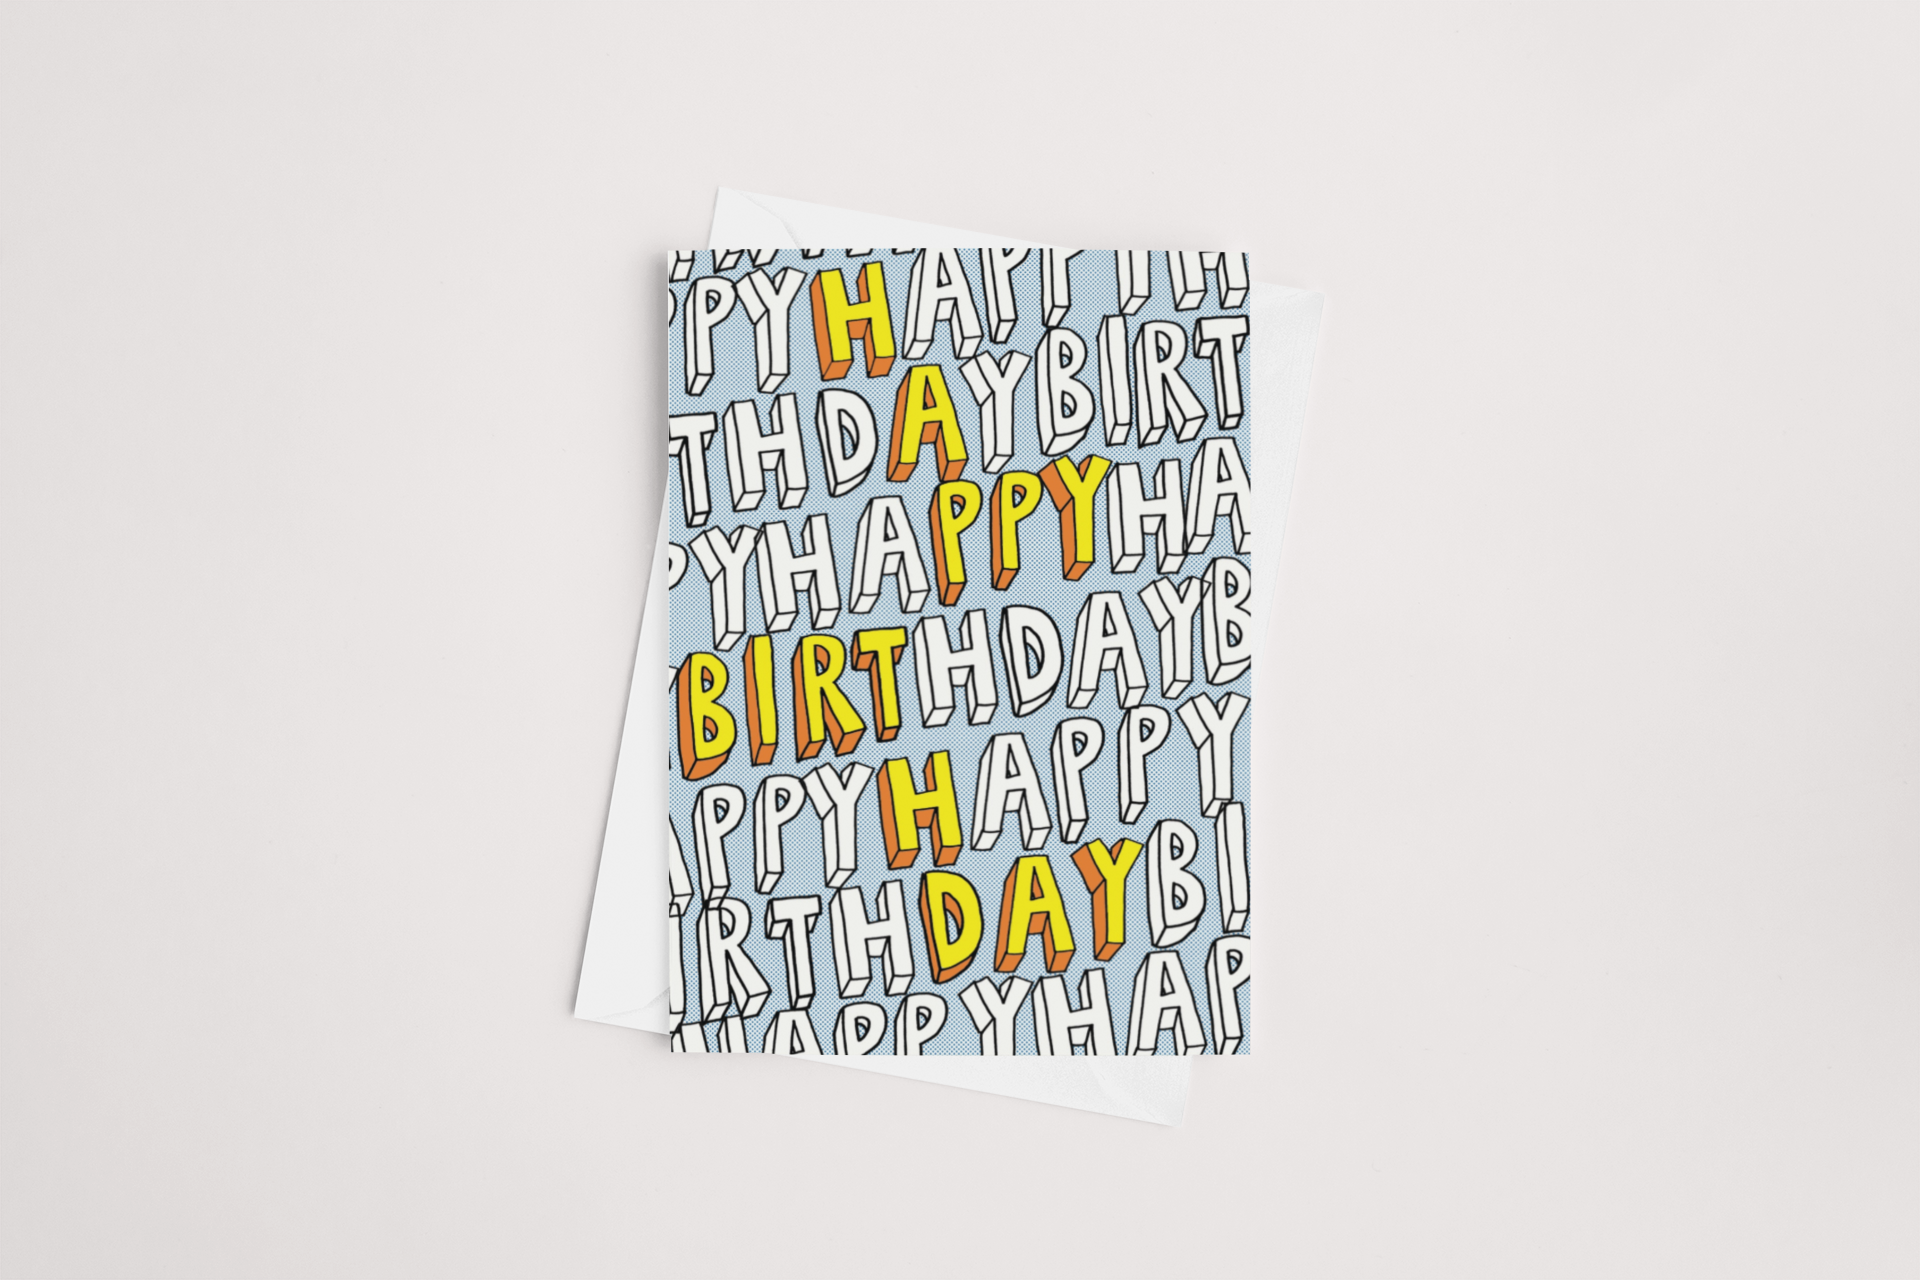 A festive Block Birthday Card from Tuesday Print with the phrase "happy birthday" repeatedly written in a playful and colorful font on a white background. This product of New Zealand is perfect for sending warm wishes.